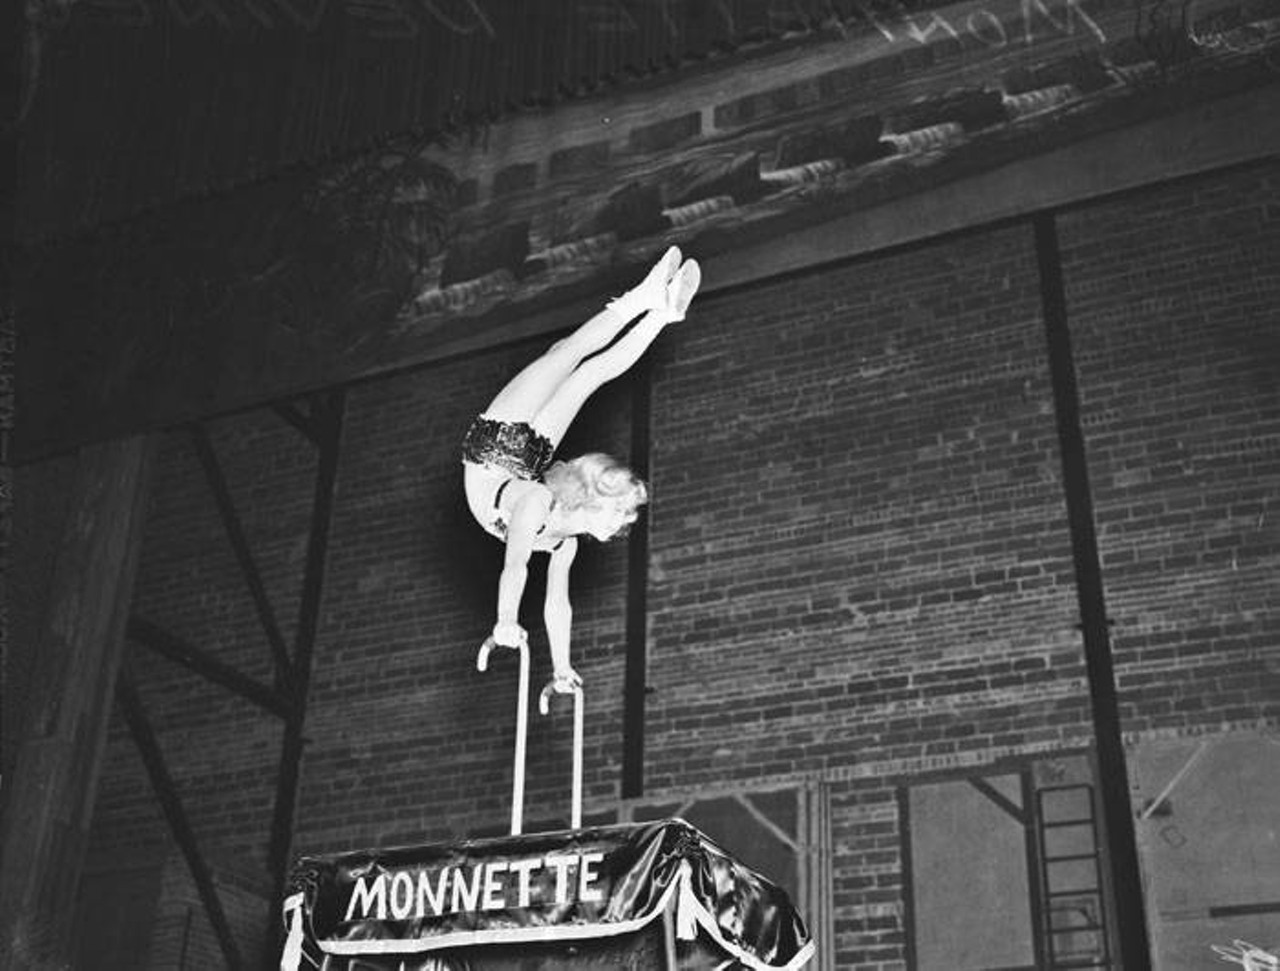 Acrobat Monnette DeViney Performing
Monnette Deviney performing the ultimate tricep dips on canes.